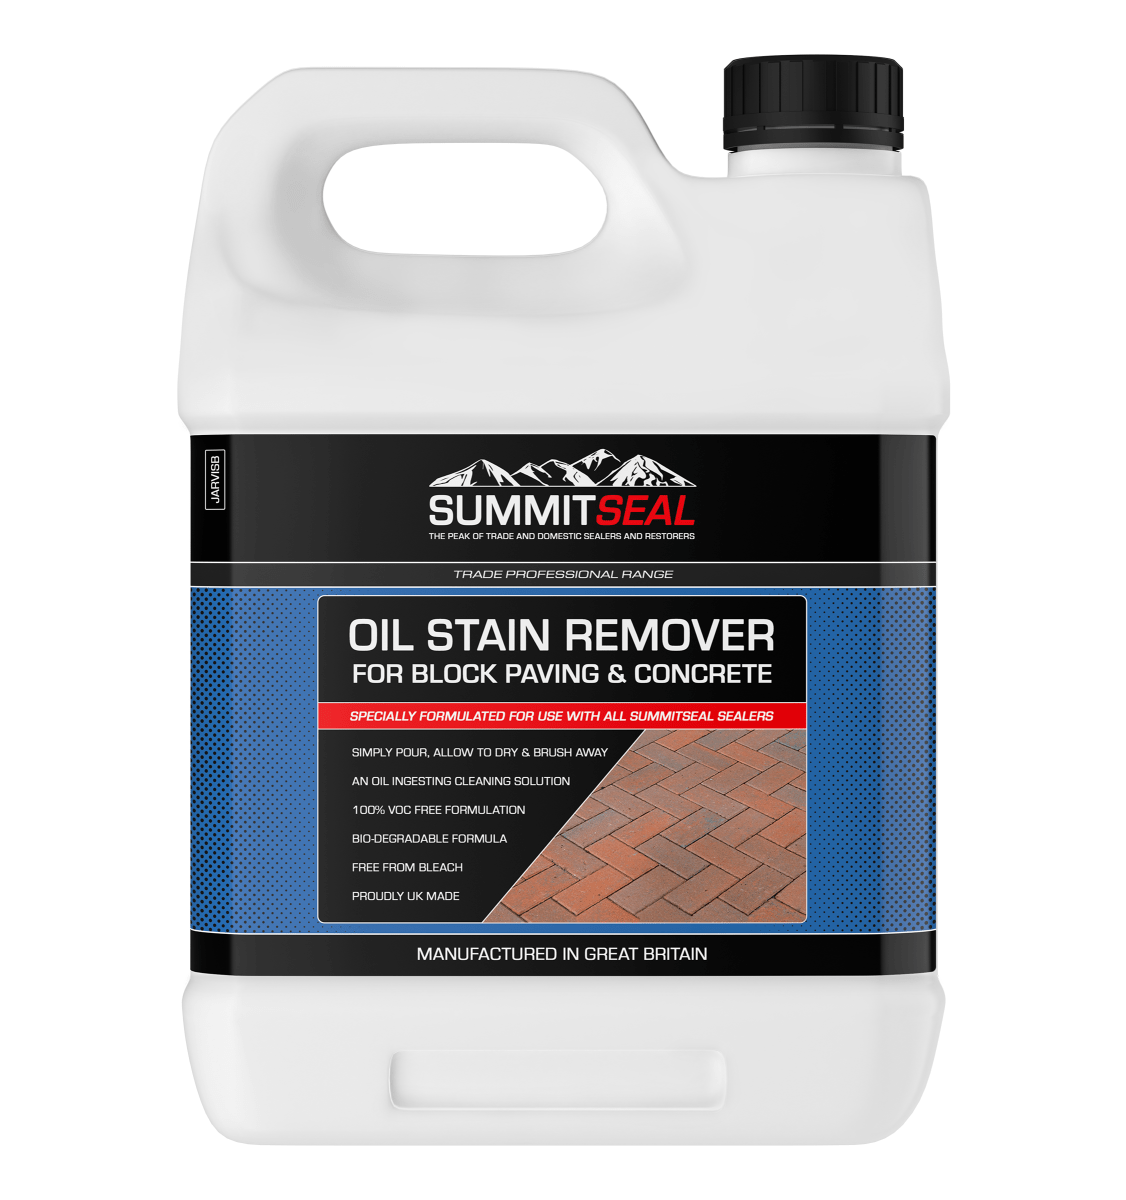 SummitSeal - Oil Stain Remover for Block Paving & Concrete (Available in 1 or 5 Litre Sizes) - Premium Paints